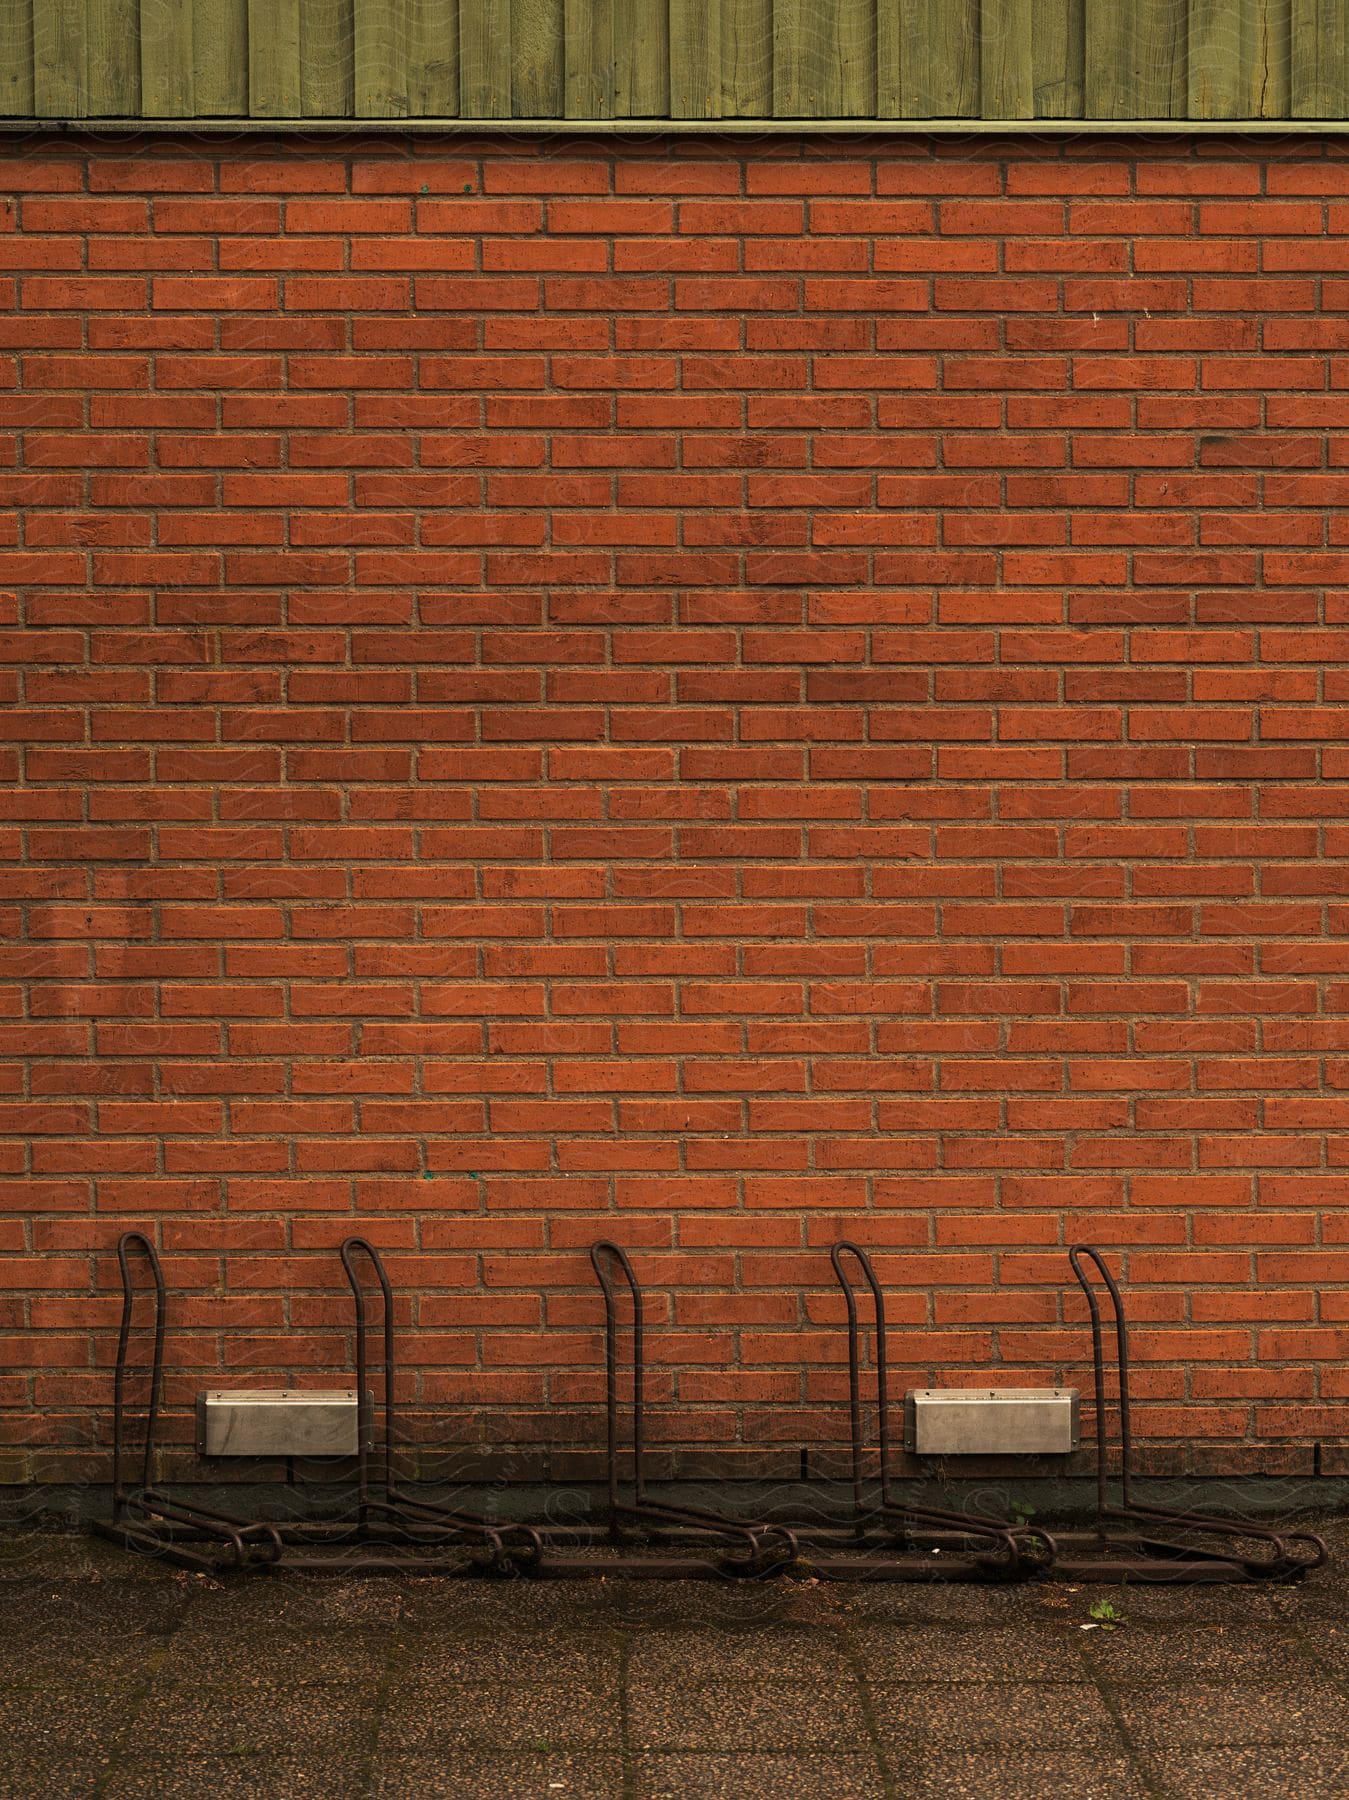 A bicycle rack positioned at the base of a brick wall